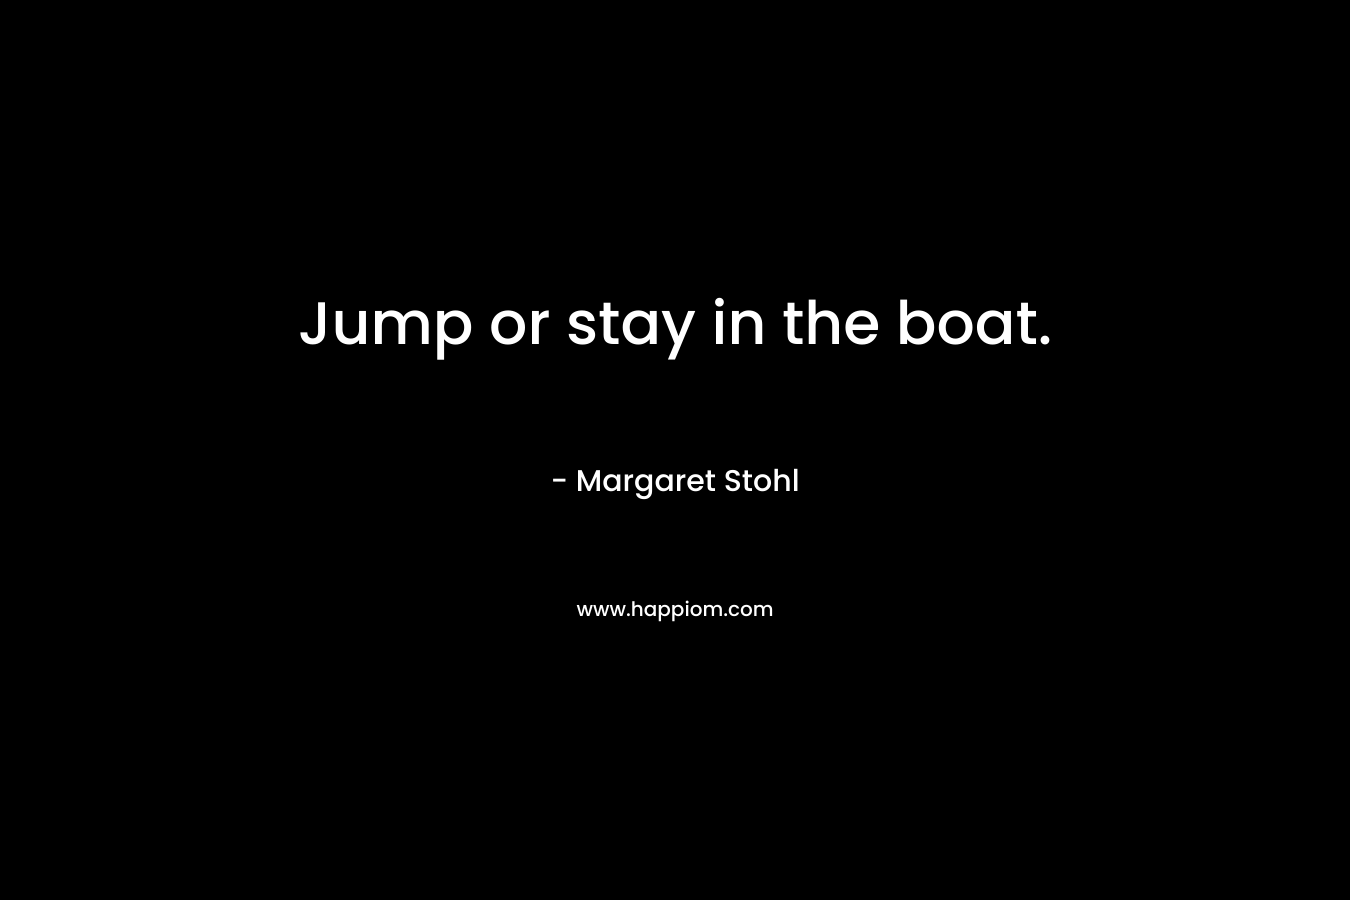 Jump or stay in the boat. – Margaret Stohl